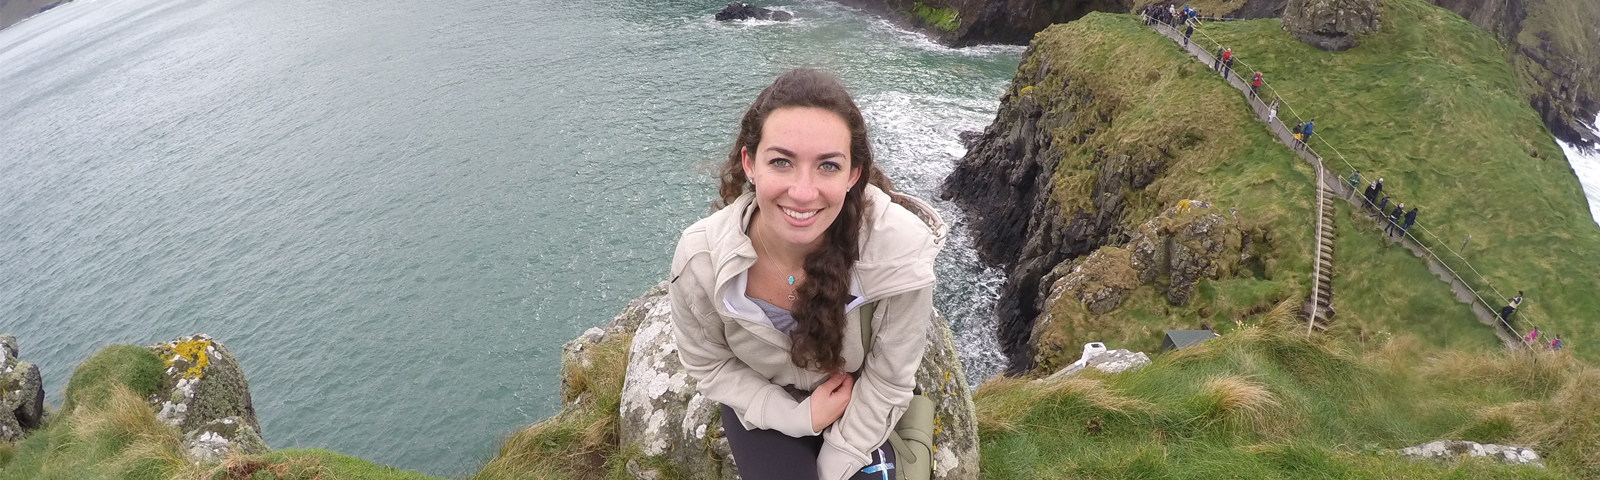 Student smiling, posing on a cliff overlooking water